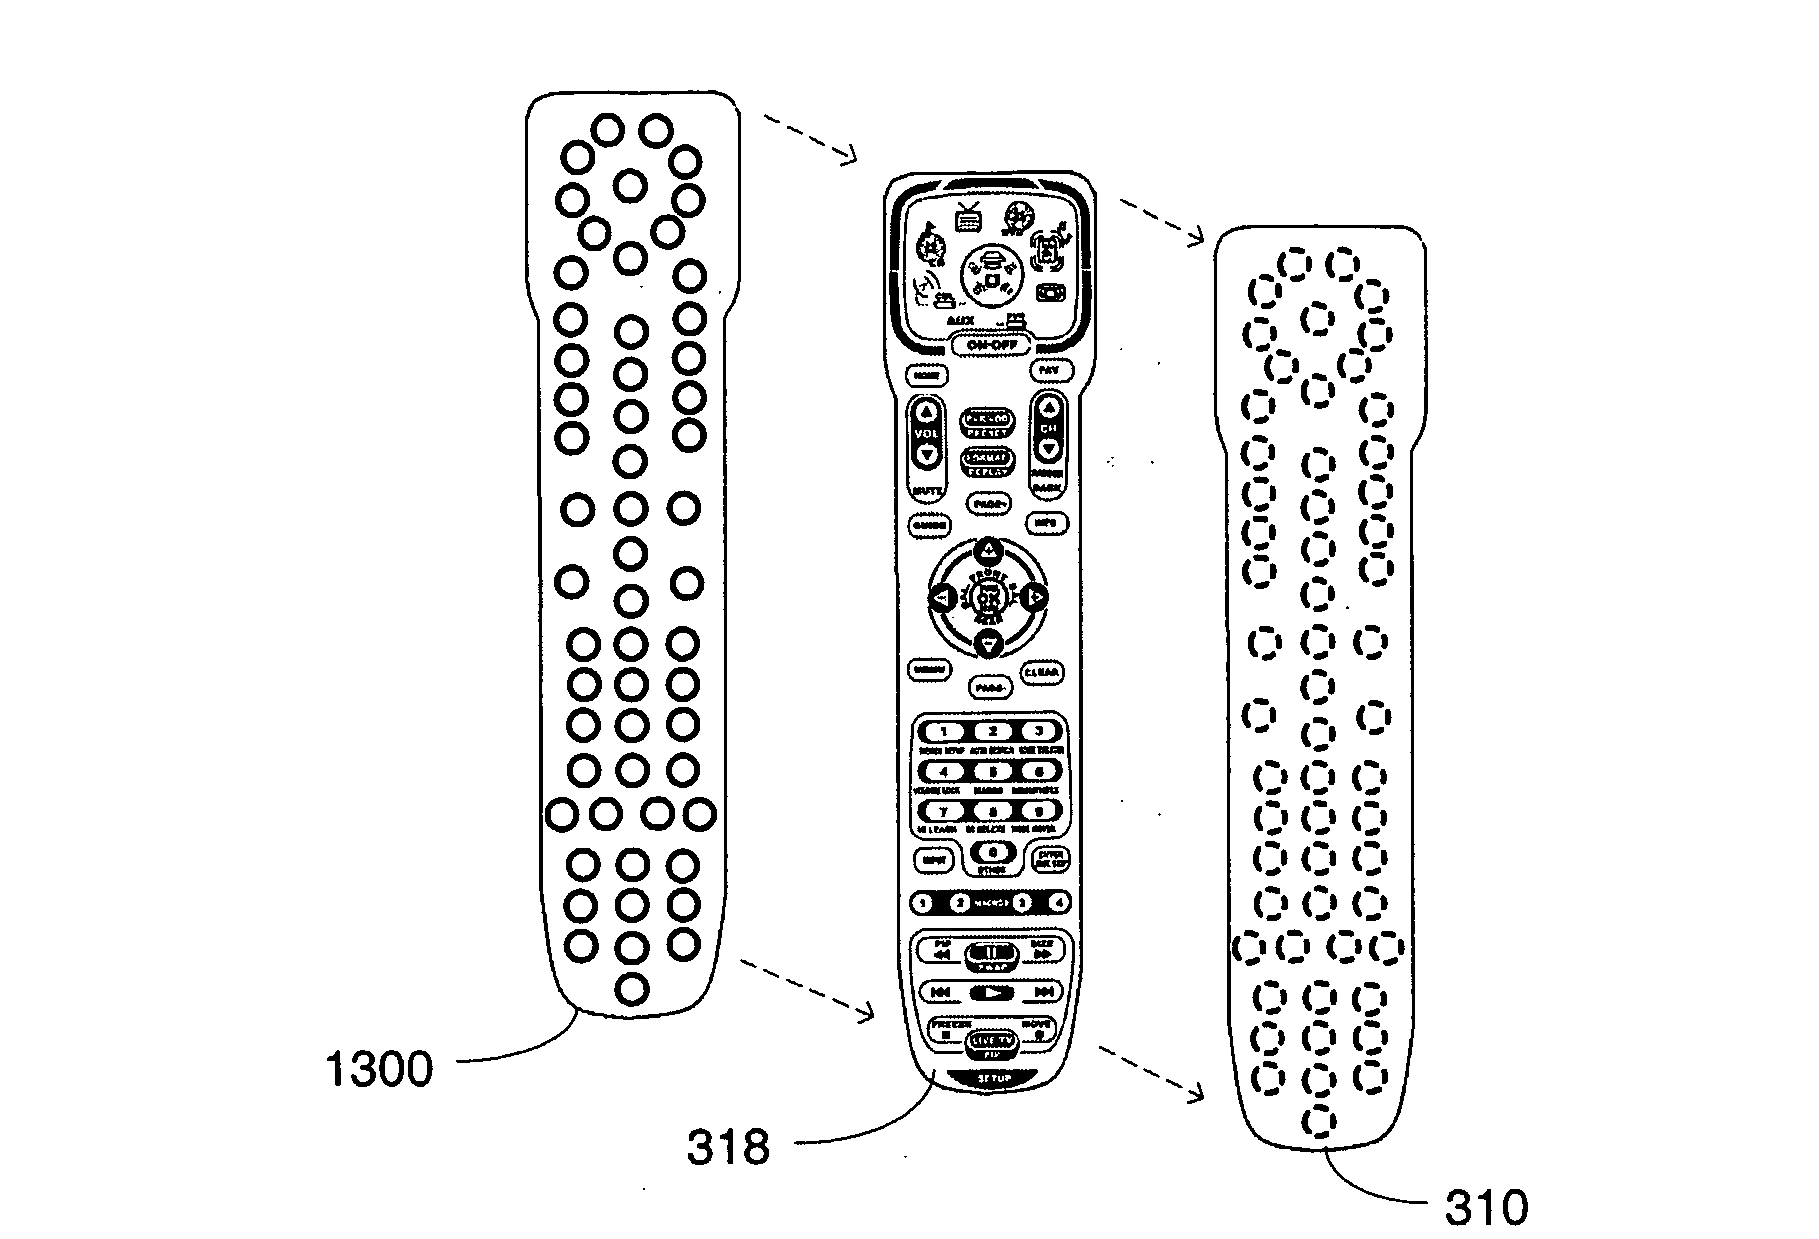 Universal Remote Control or Universal Remote Control/Telephone Combination with Touch Operaed User Interface Having Tactile Feedback